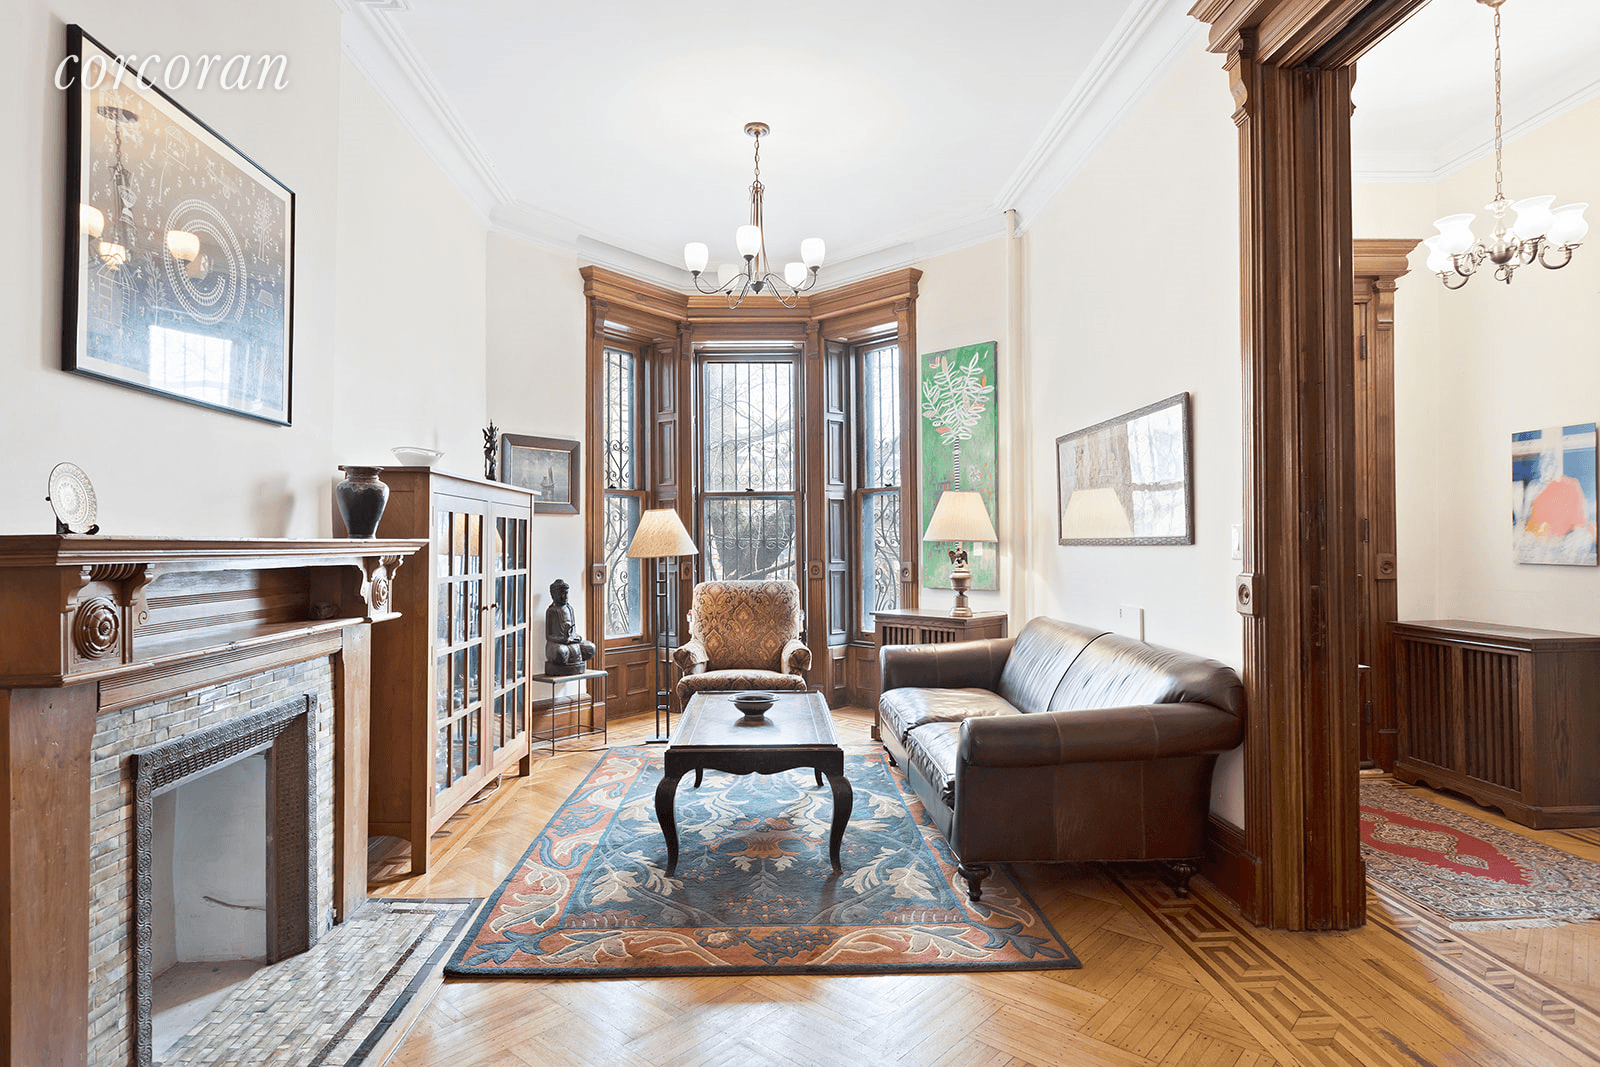 This beautifully maintained sprawling and sunny triplex rental is located in the heart of Park Slope.